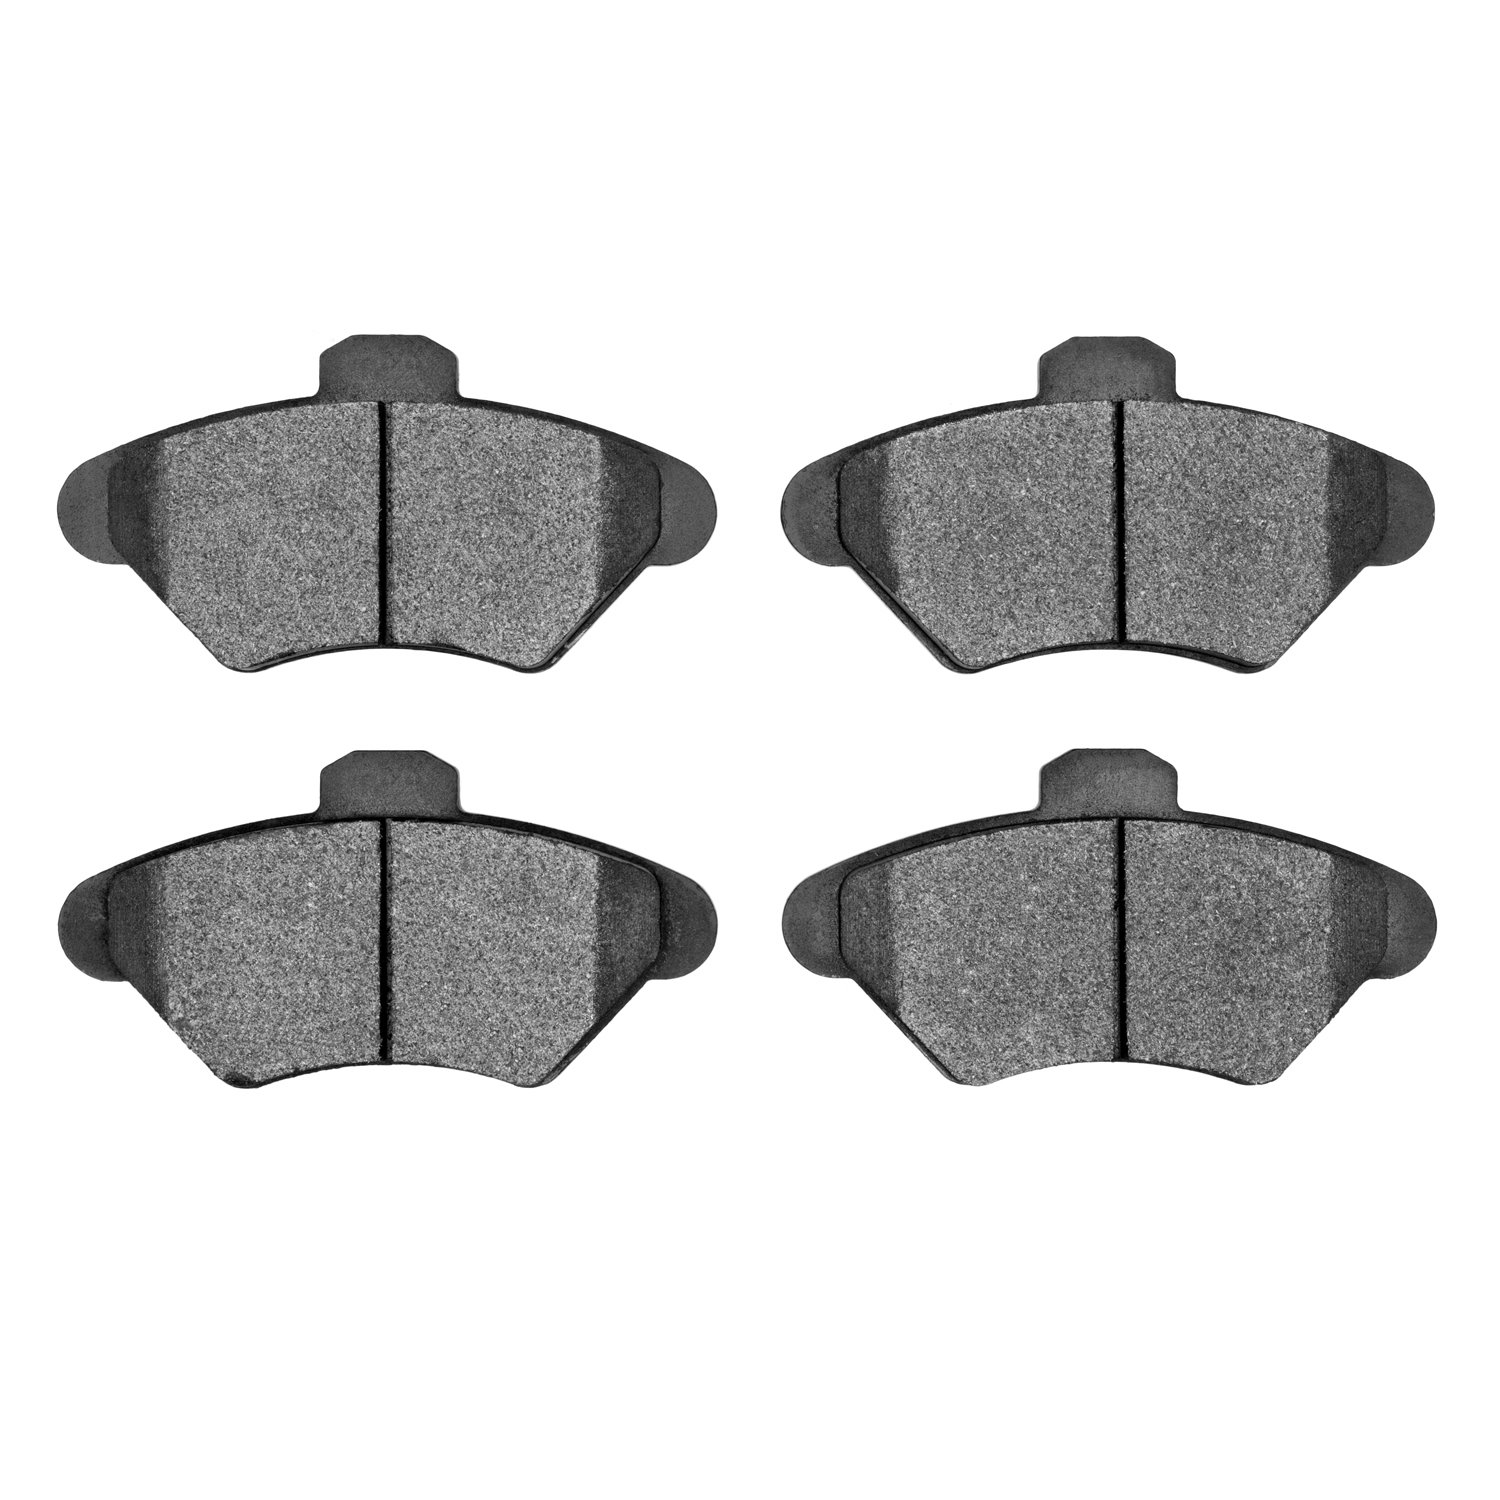 1310-0600-00 3000-Series Ceramic Brake Pads, 1993-1998 Ford/Lincoln/Mercury/Mazda, Position: Front